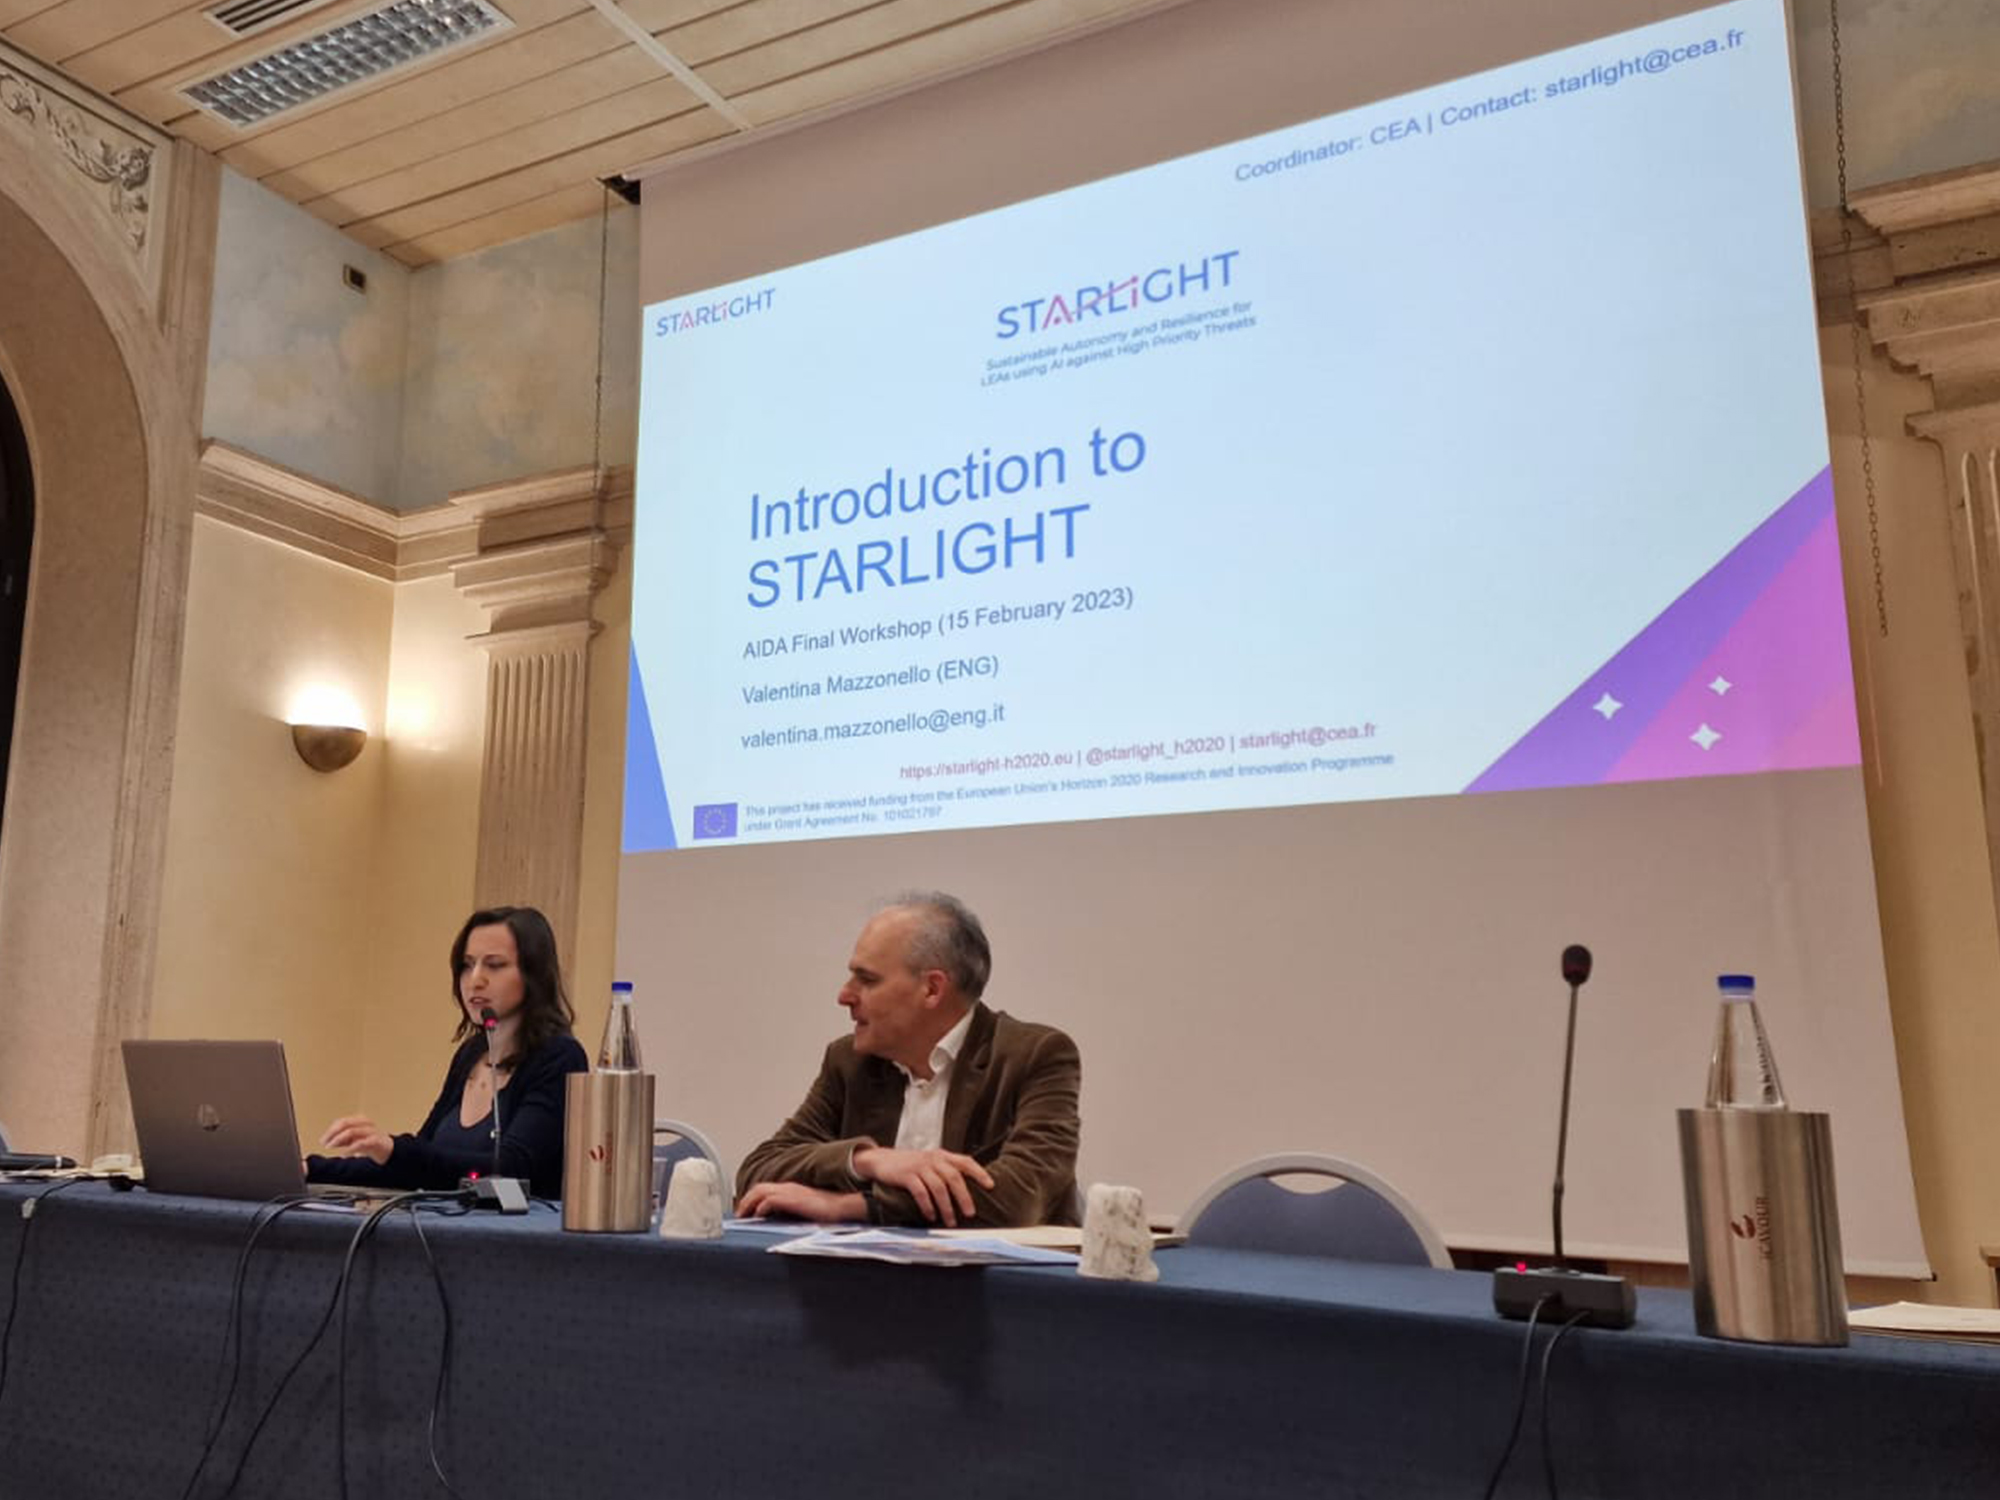 STARLIGHT was presented at the Final AIDA Workshop in Rome